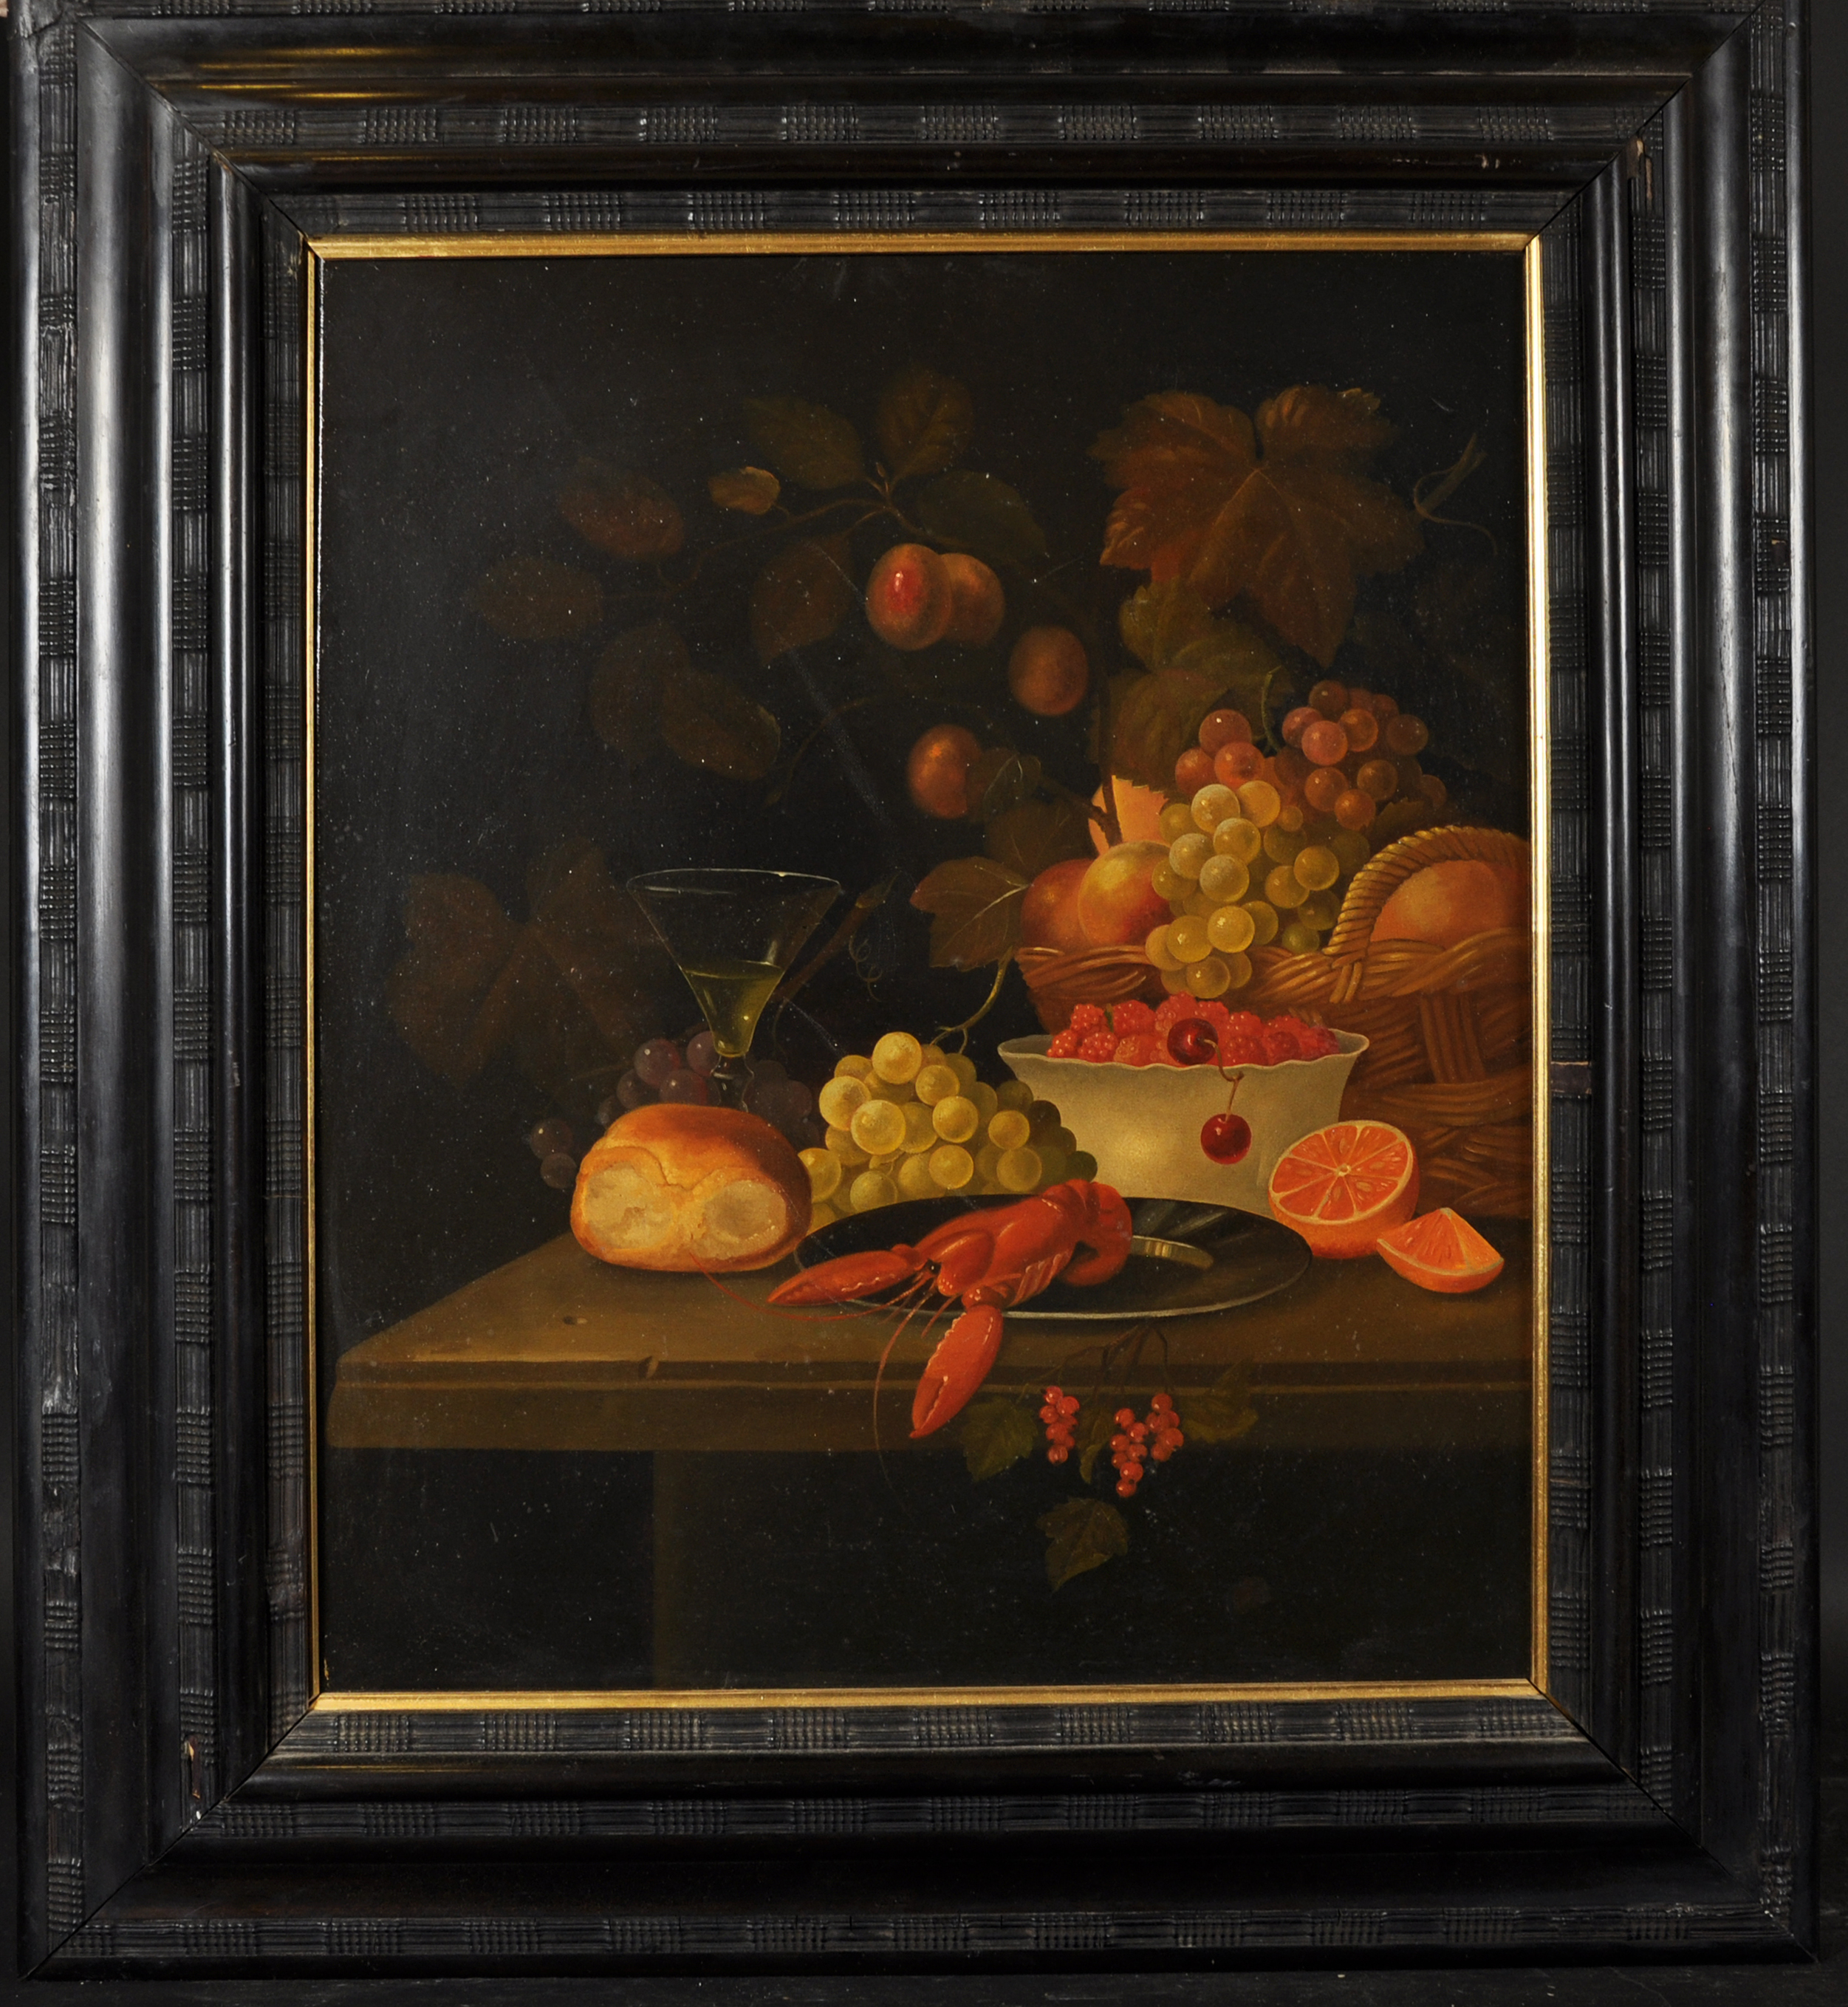 Manner of Cornelis de Heem (1631-1695) Dutch. Still Life of Fruit, Bread, a Glass and a Lobster on a - Image 2 of 4